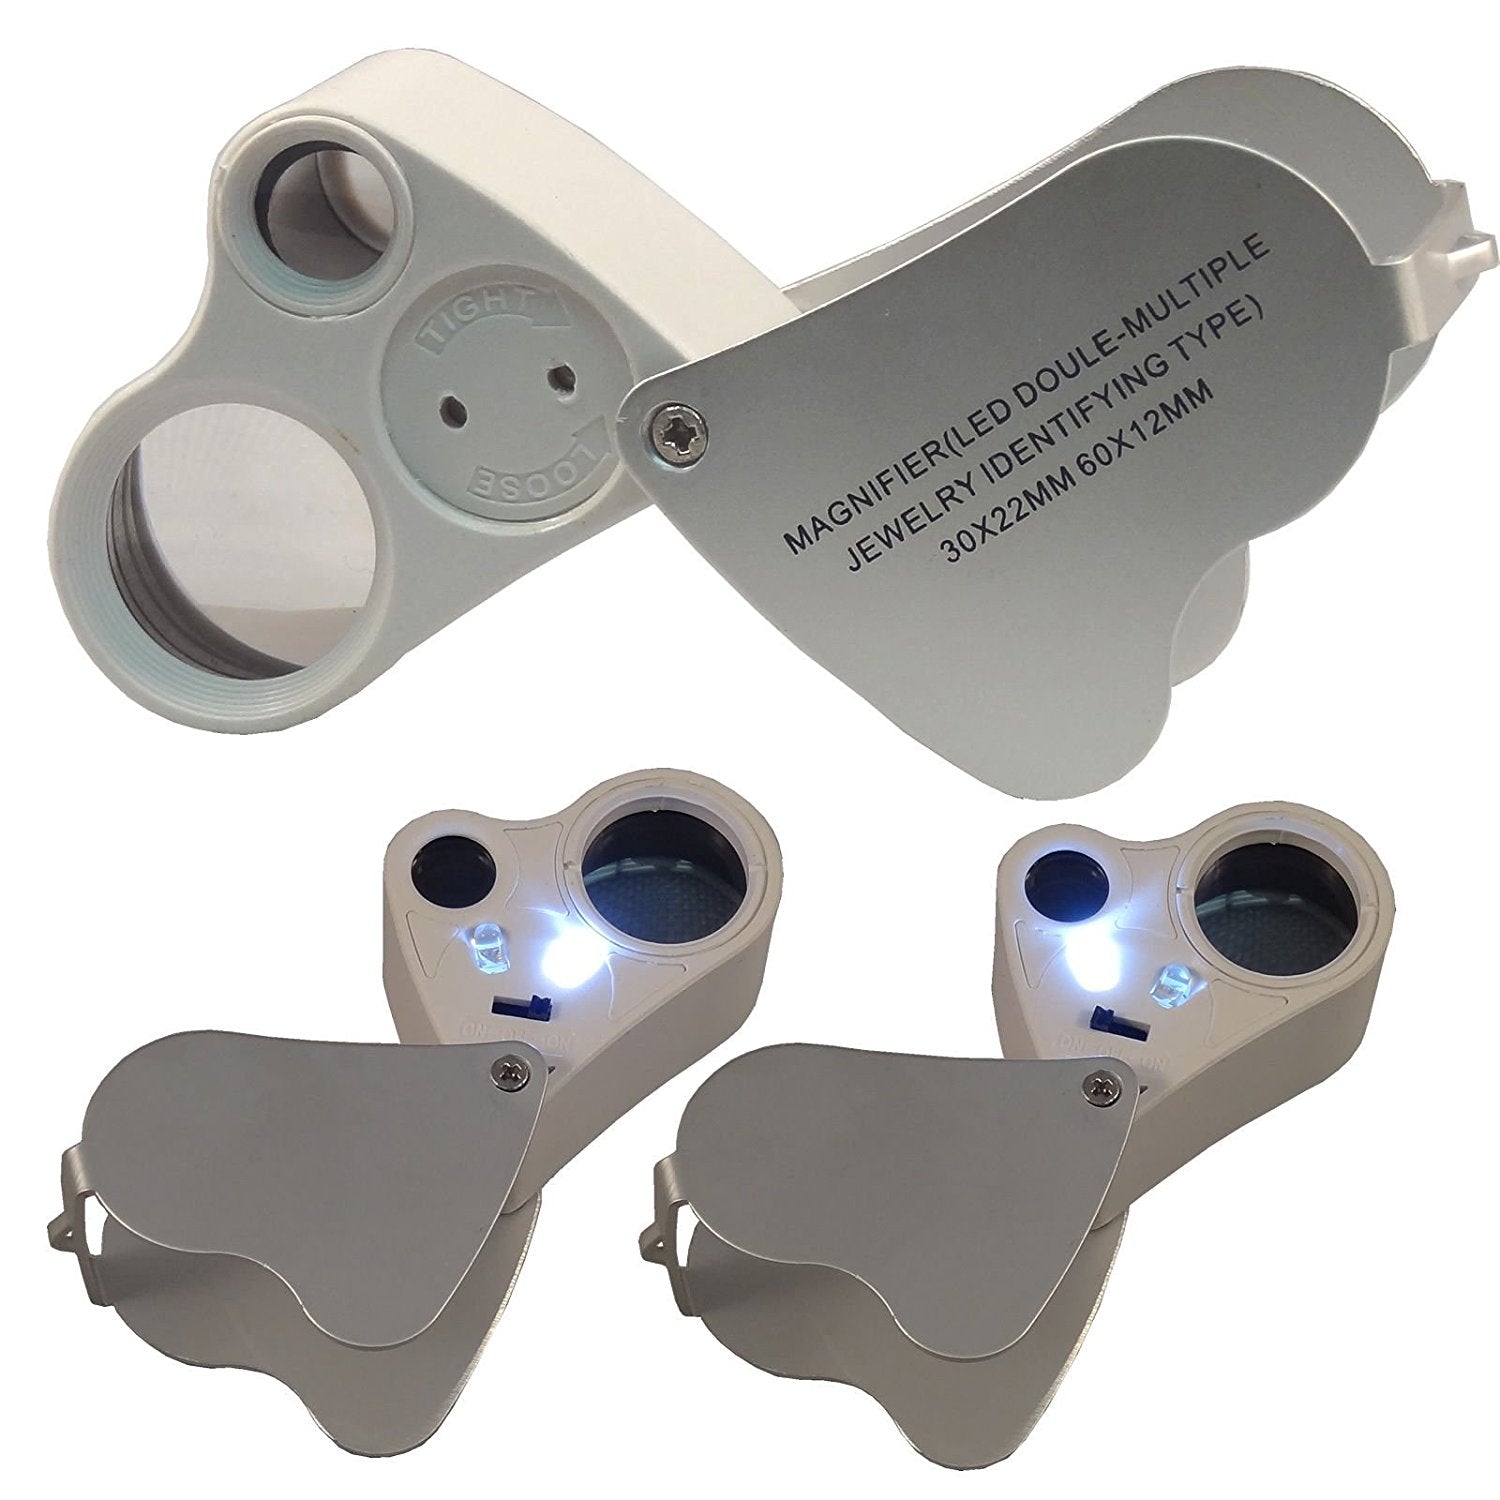  30X 60X Double-Multiple Glass Jeweler Jeweler's Jewelry  Magnifier Magnifying Double Loupe Loop with LED Light by FireKingdom :  Arts, Crafts & Sewing